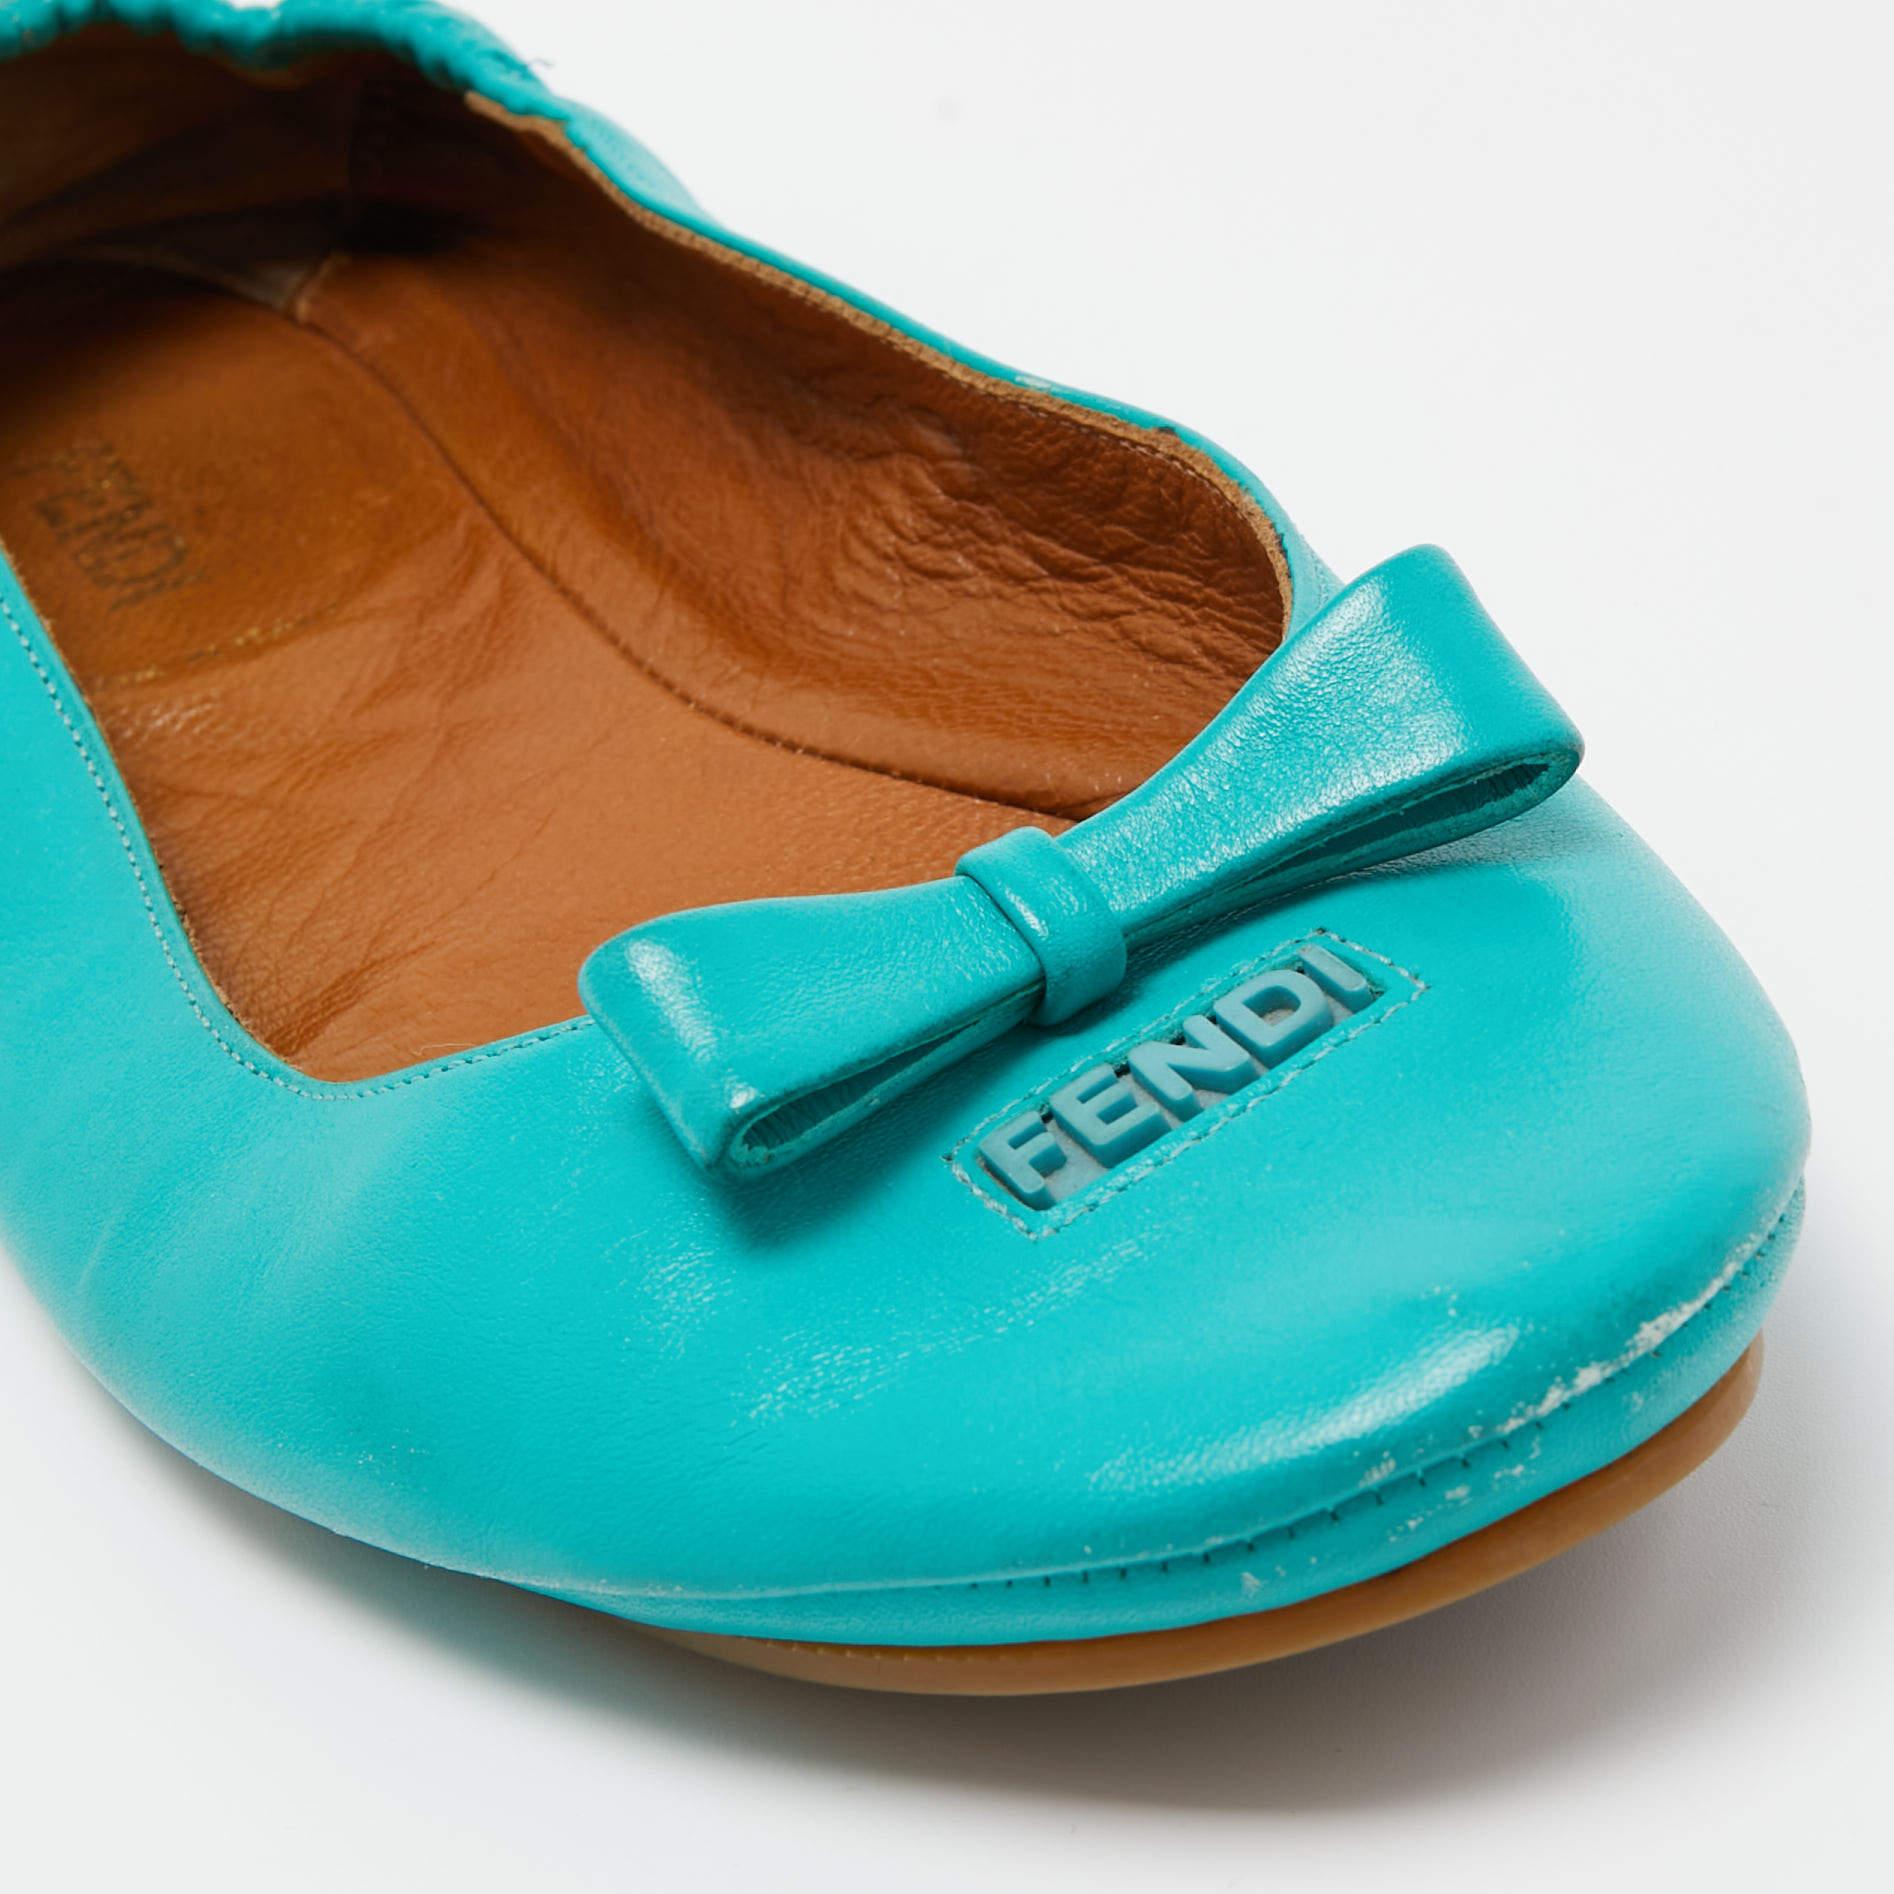 Fendi Turquoise Leather Bow Scrunch Ballet Flats Size 39 3